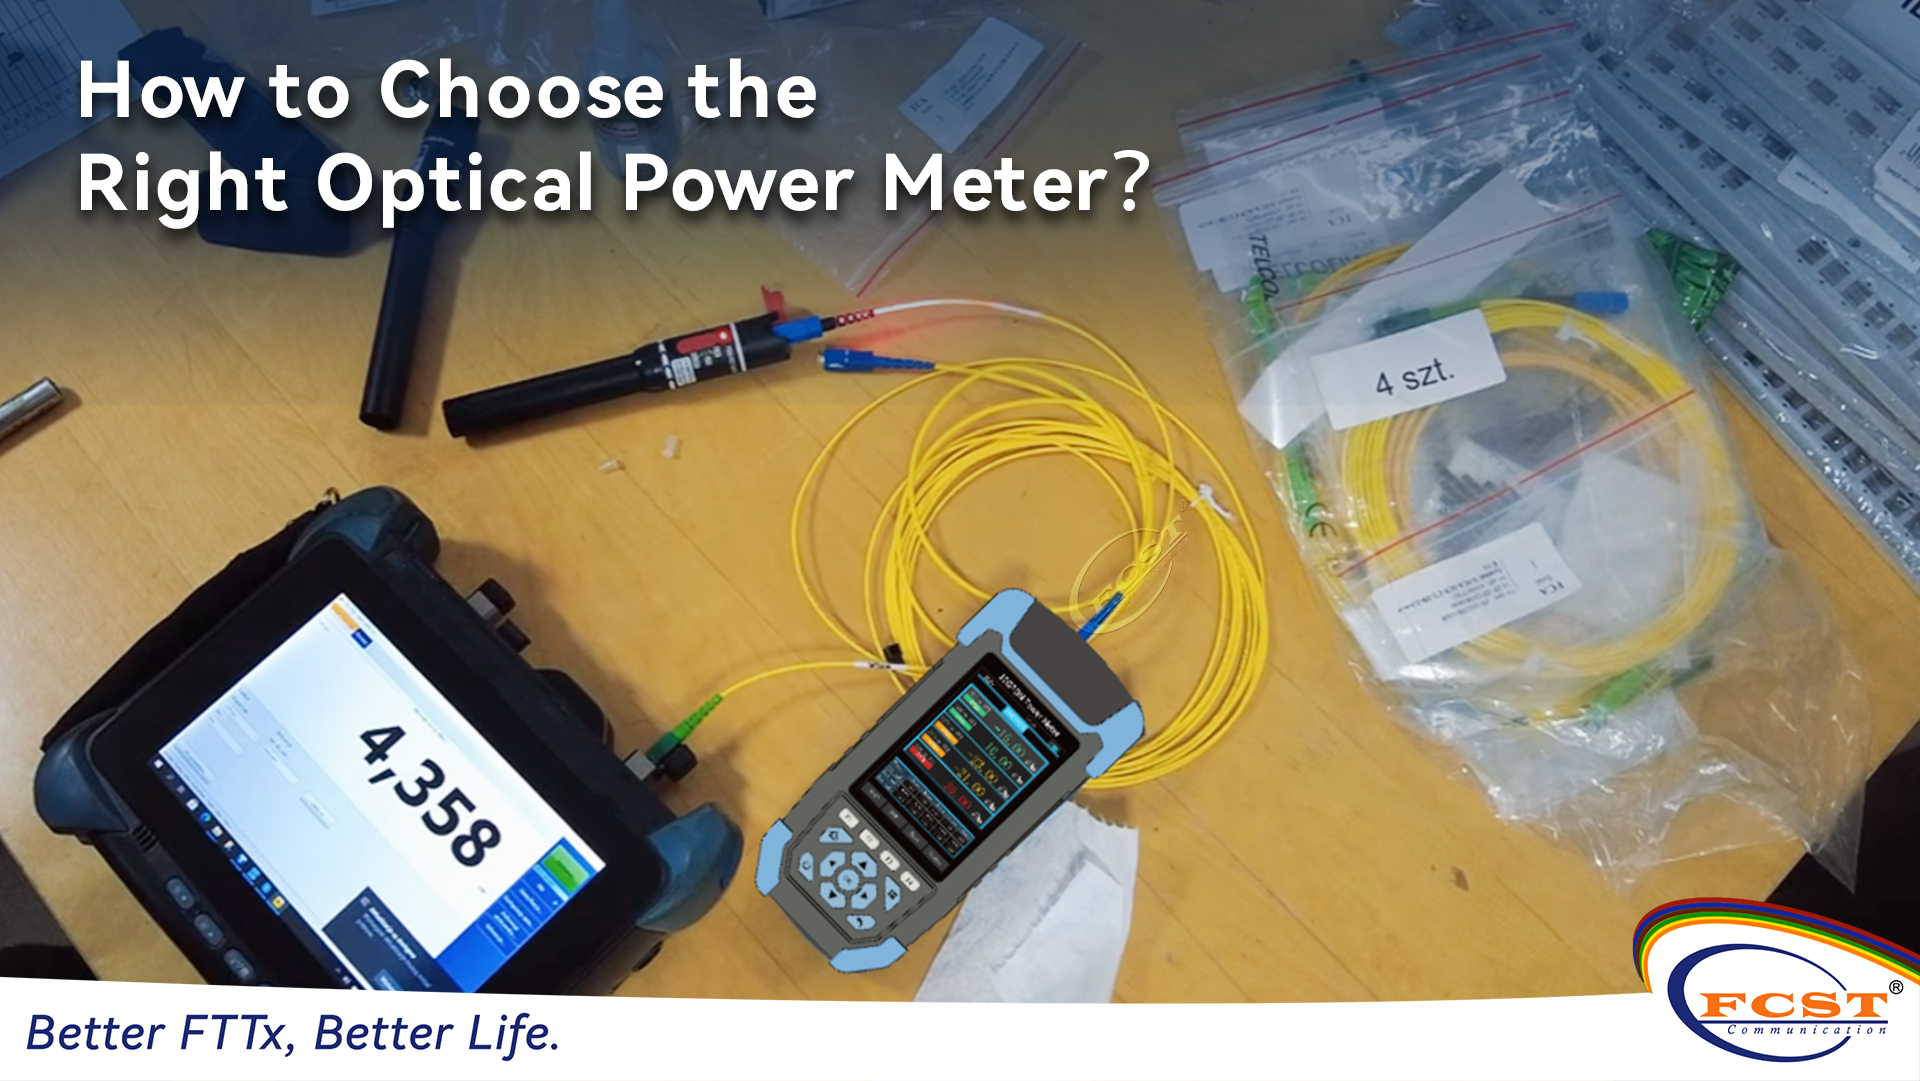 How to Choose the Right Optical Power Meter?